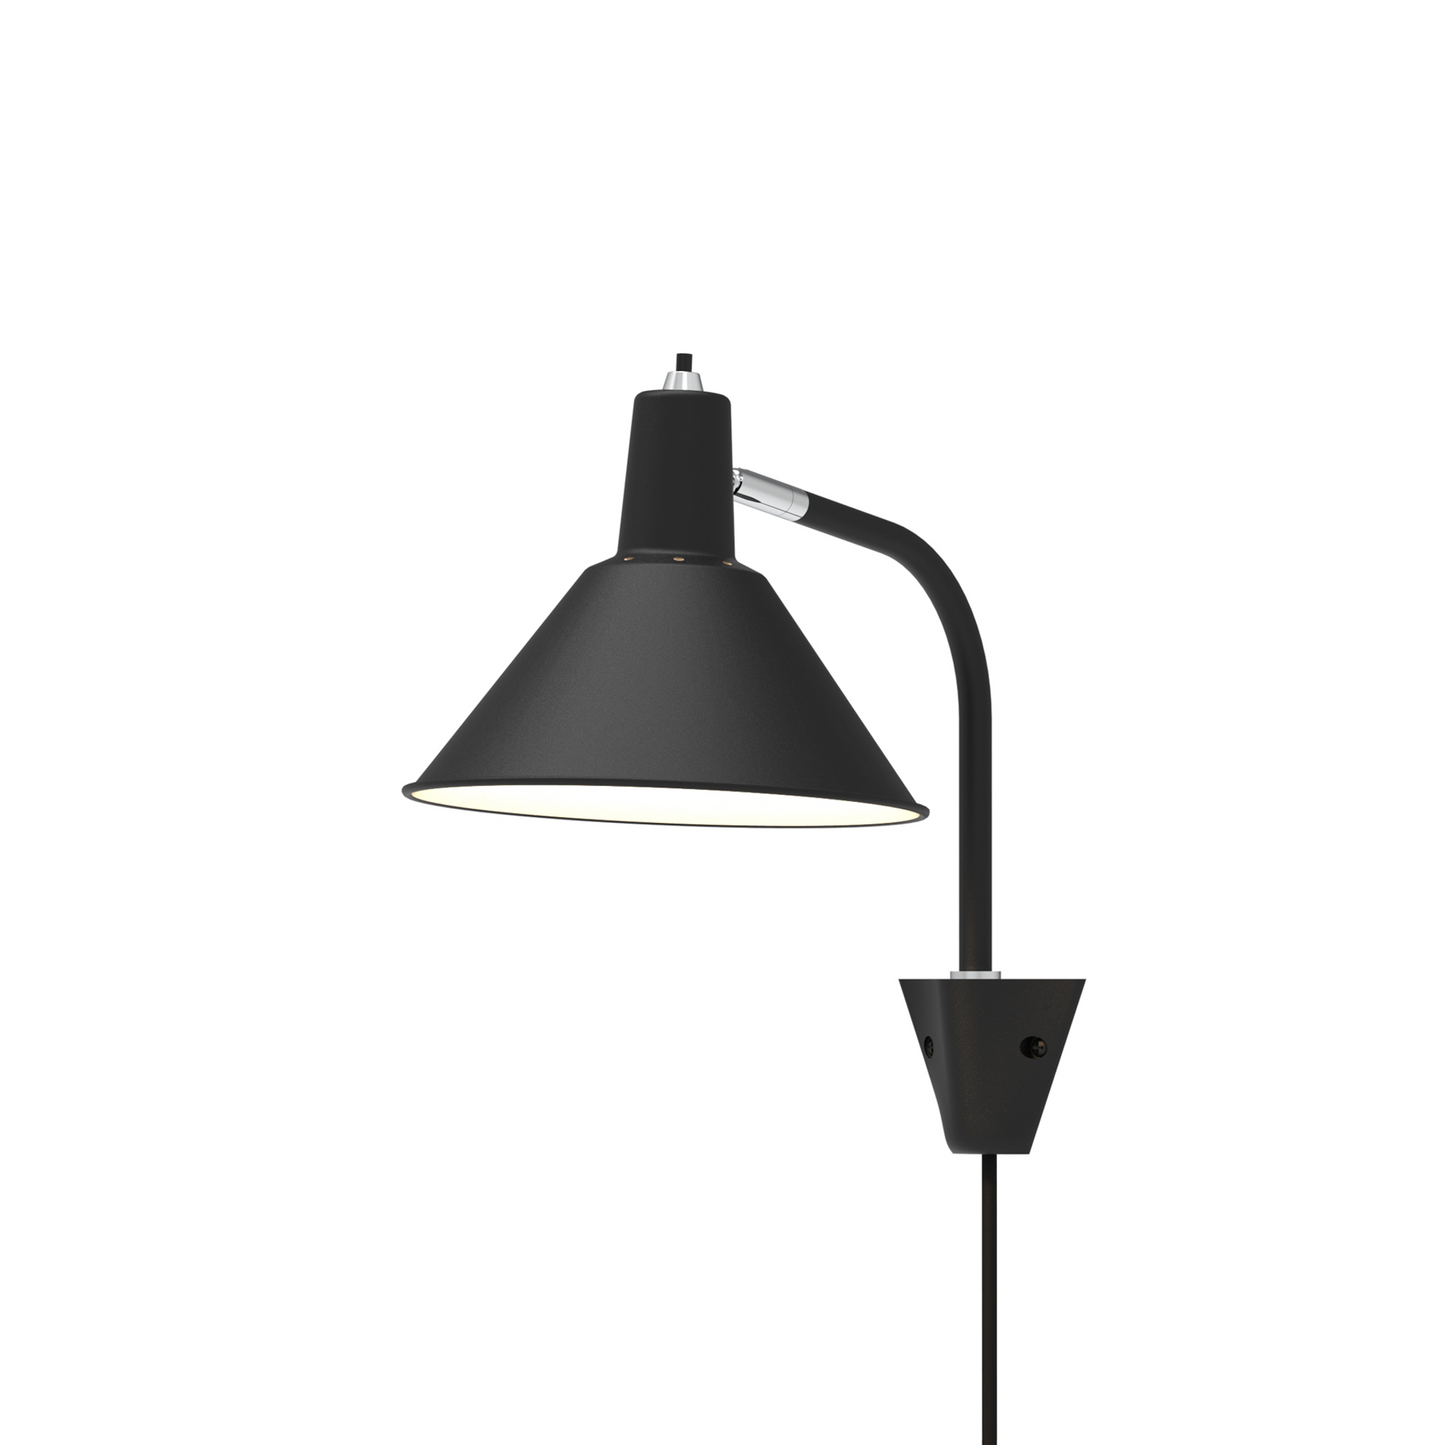 Arcon Wall Lamp by NUAD #Black / Chrome